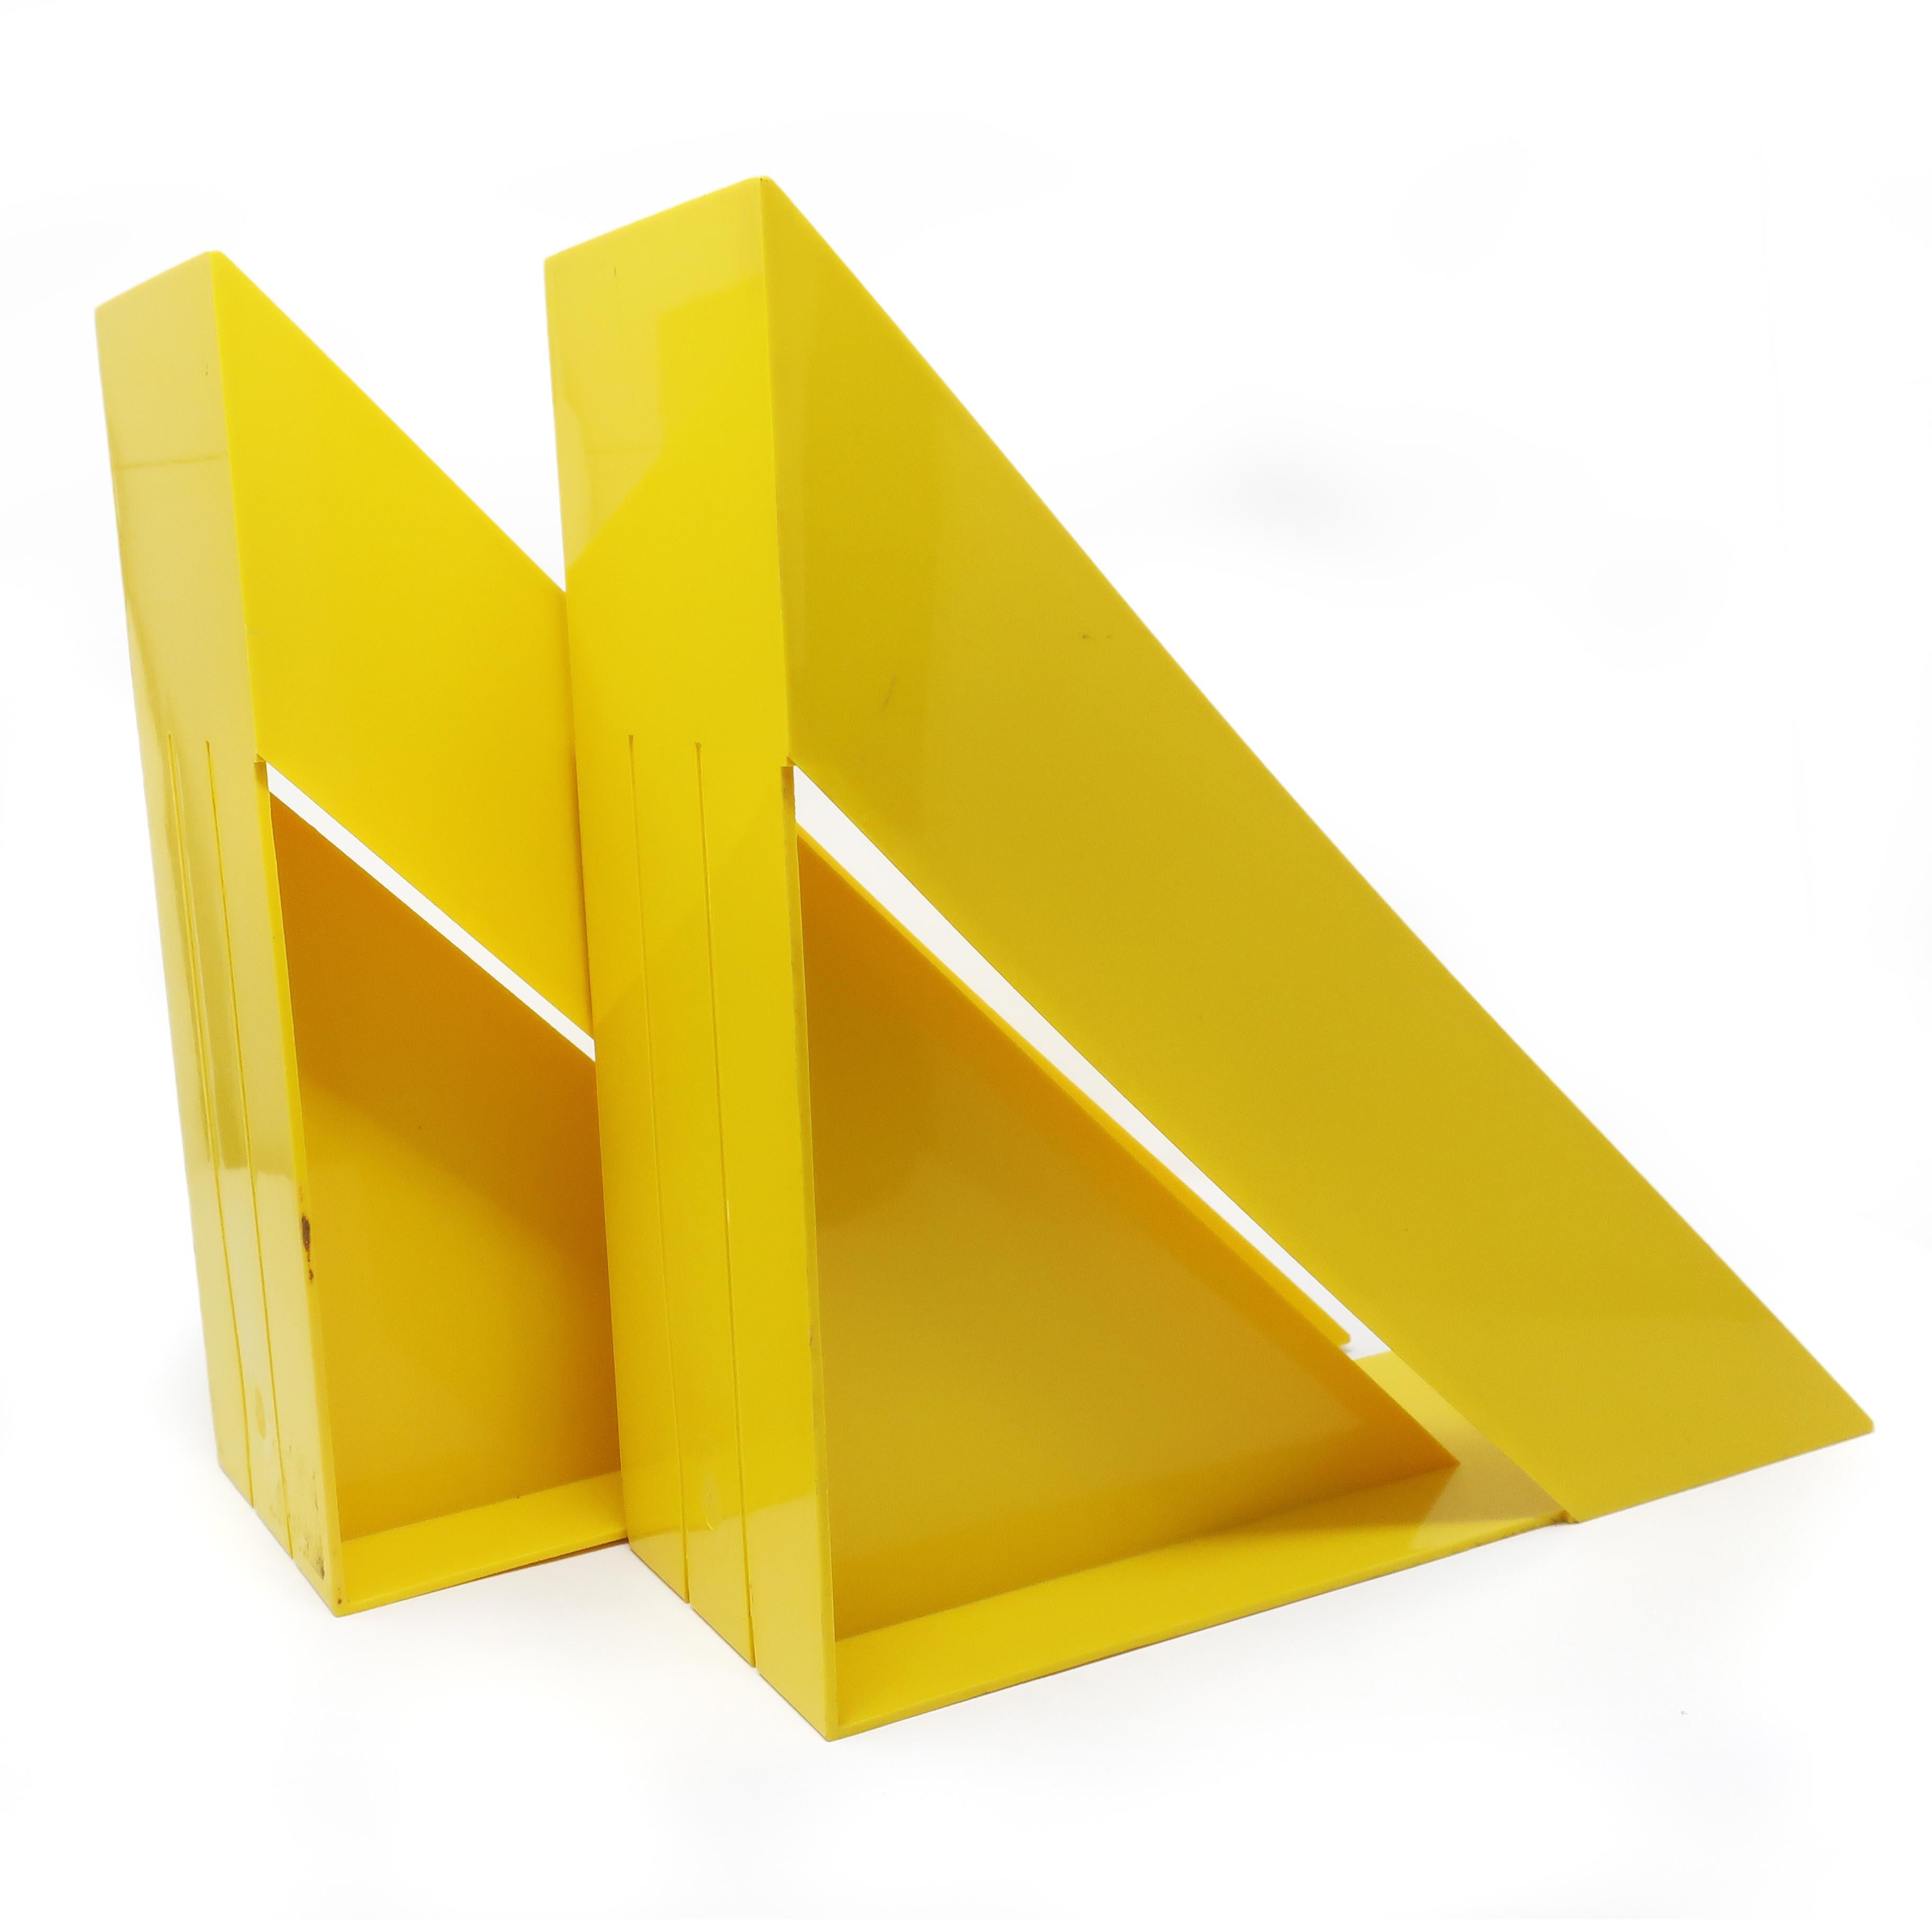 Mid-Century Modern Pair of Yellow Record or Magazine Racks by Giotto Stoppino for Heller